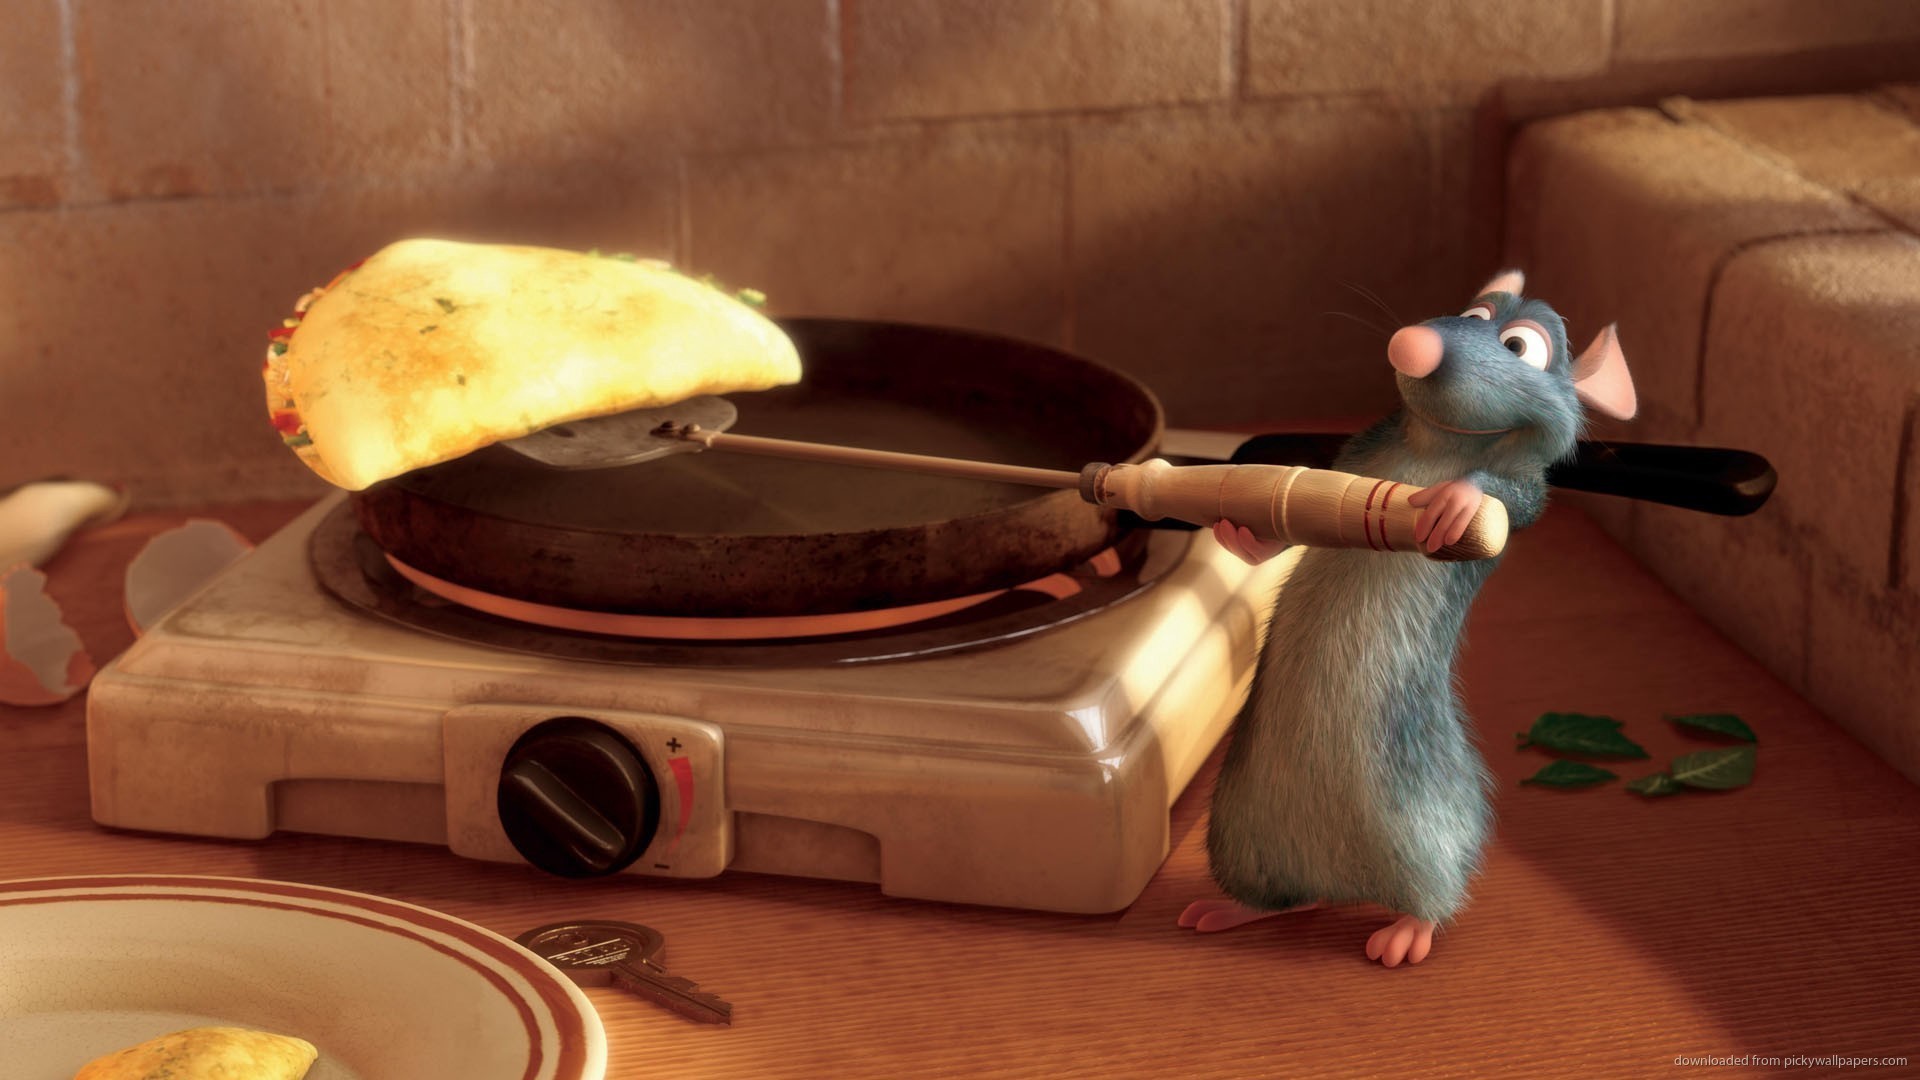 Remy creates foods for picky critics in "Ratatouille"